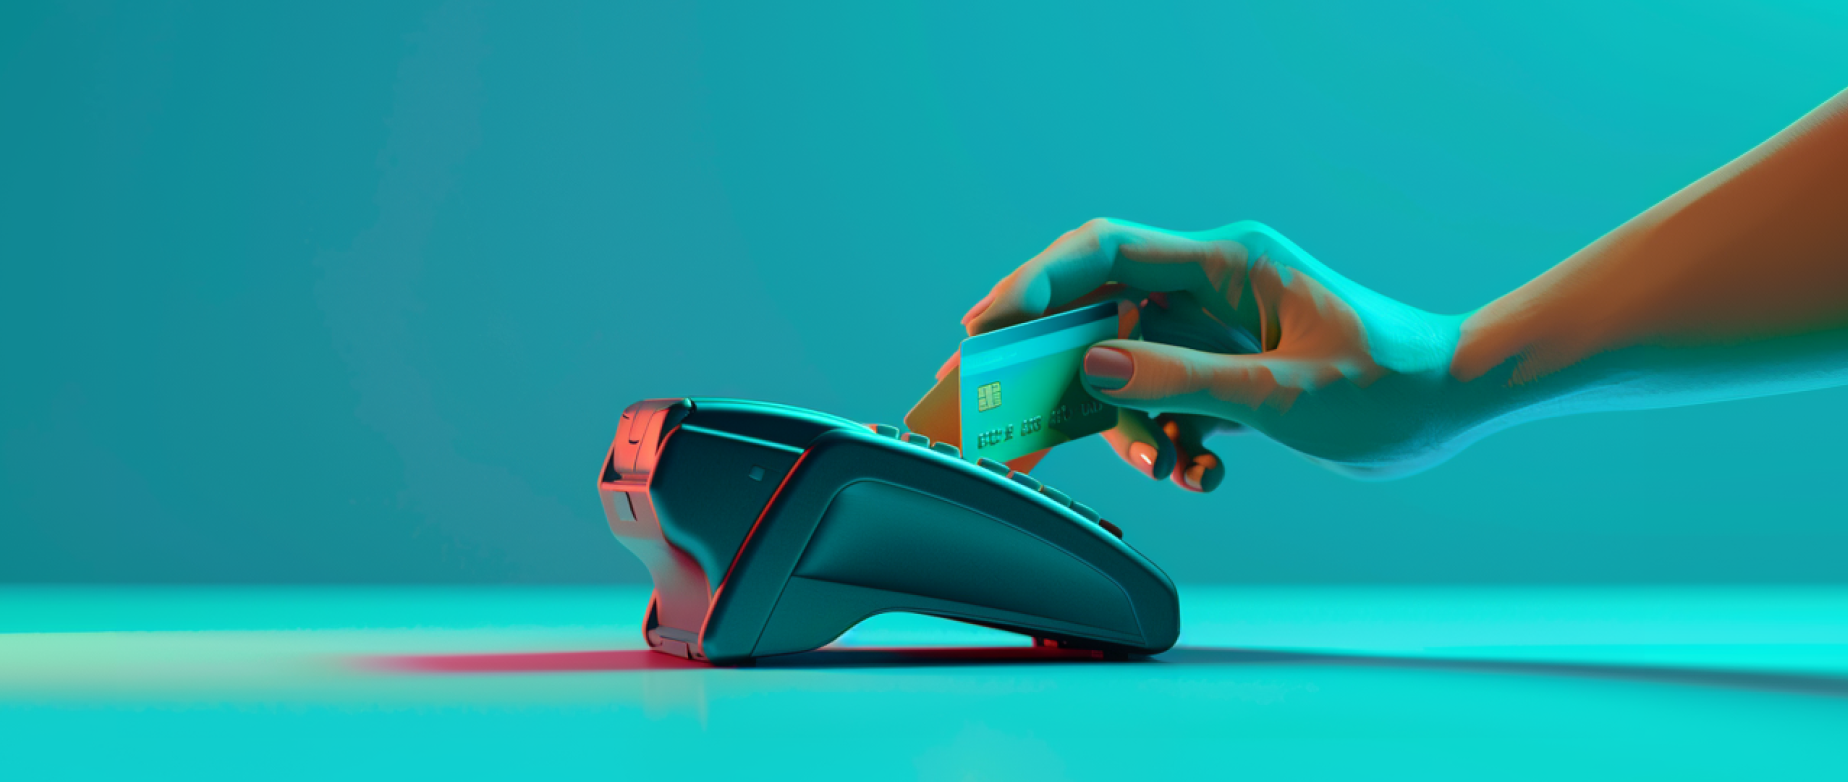 image of a card reader on a blue background